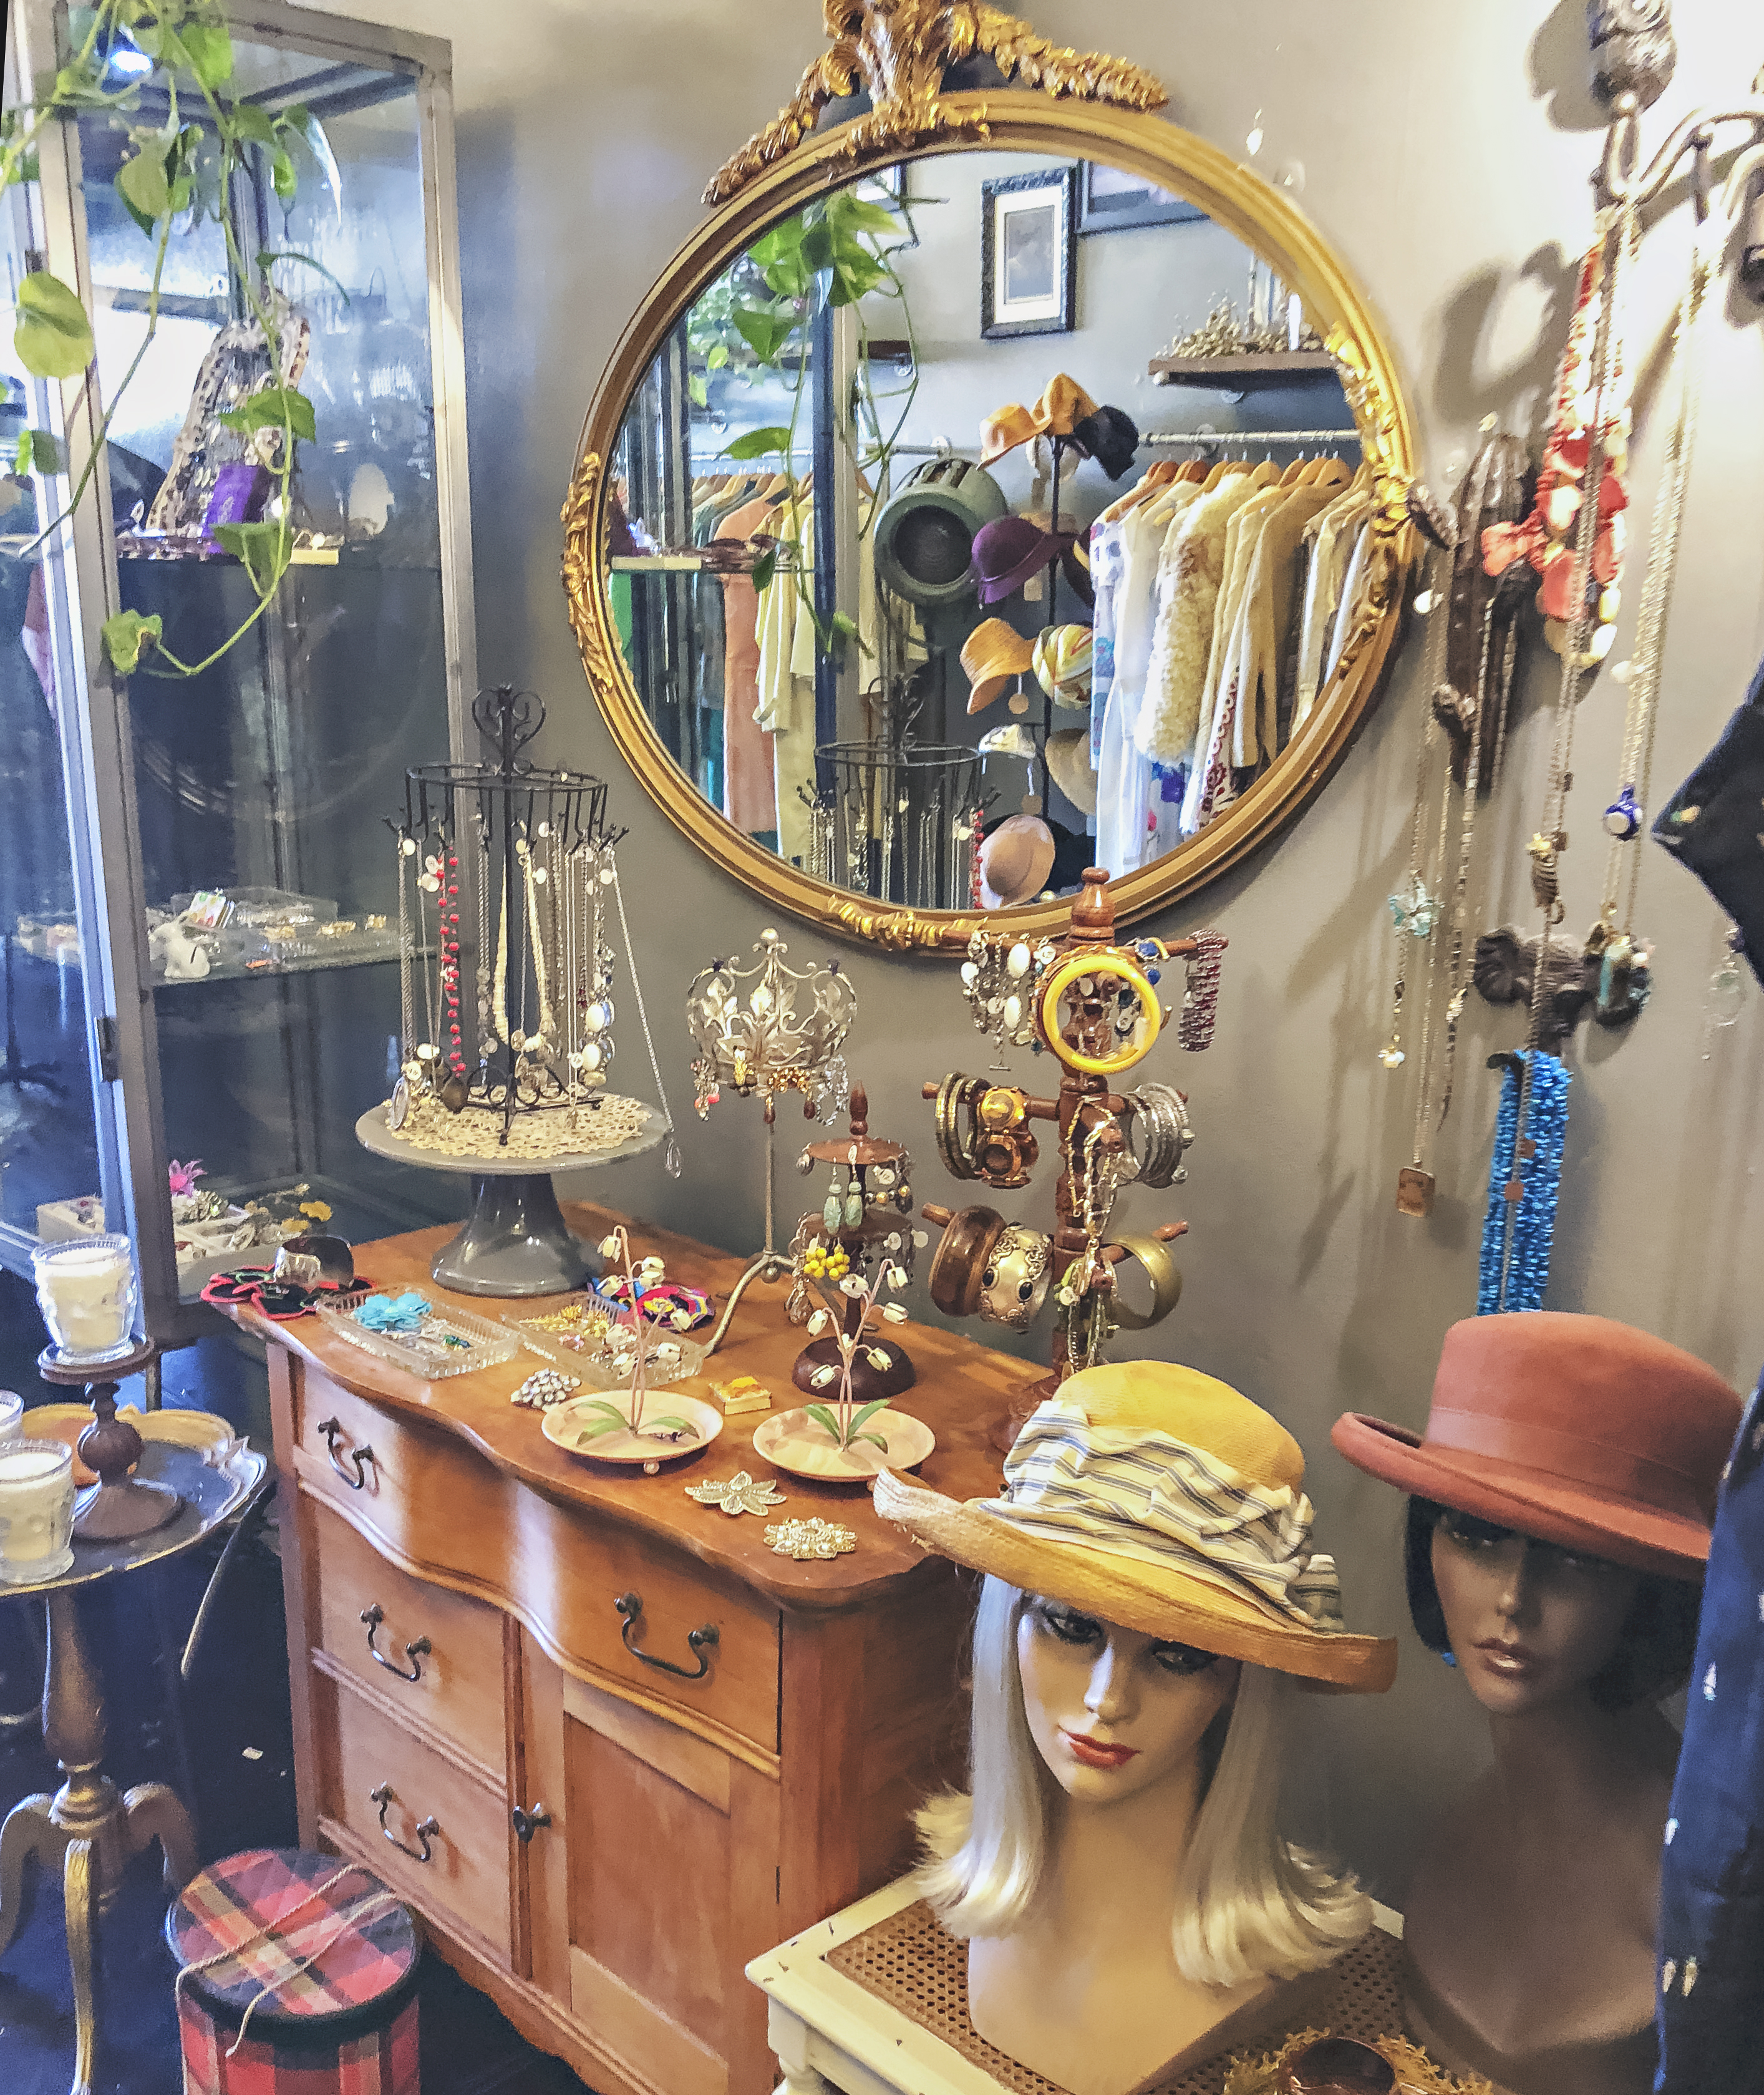 secondhand shopping, thrifting, local thrift shops, burbank thrift shops, slone vintage